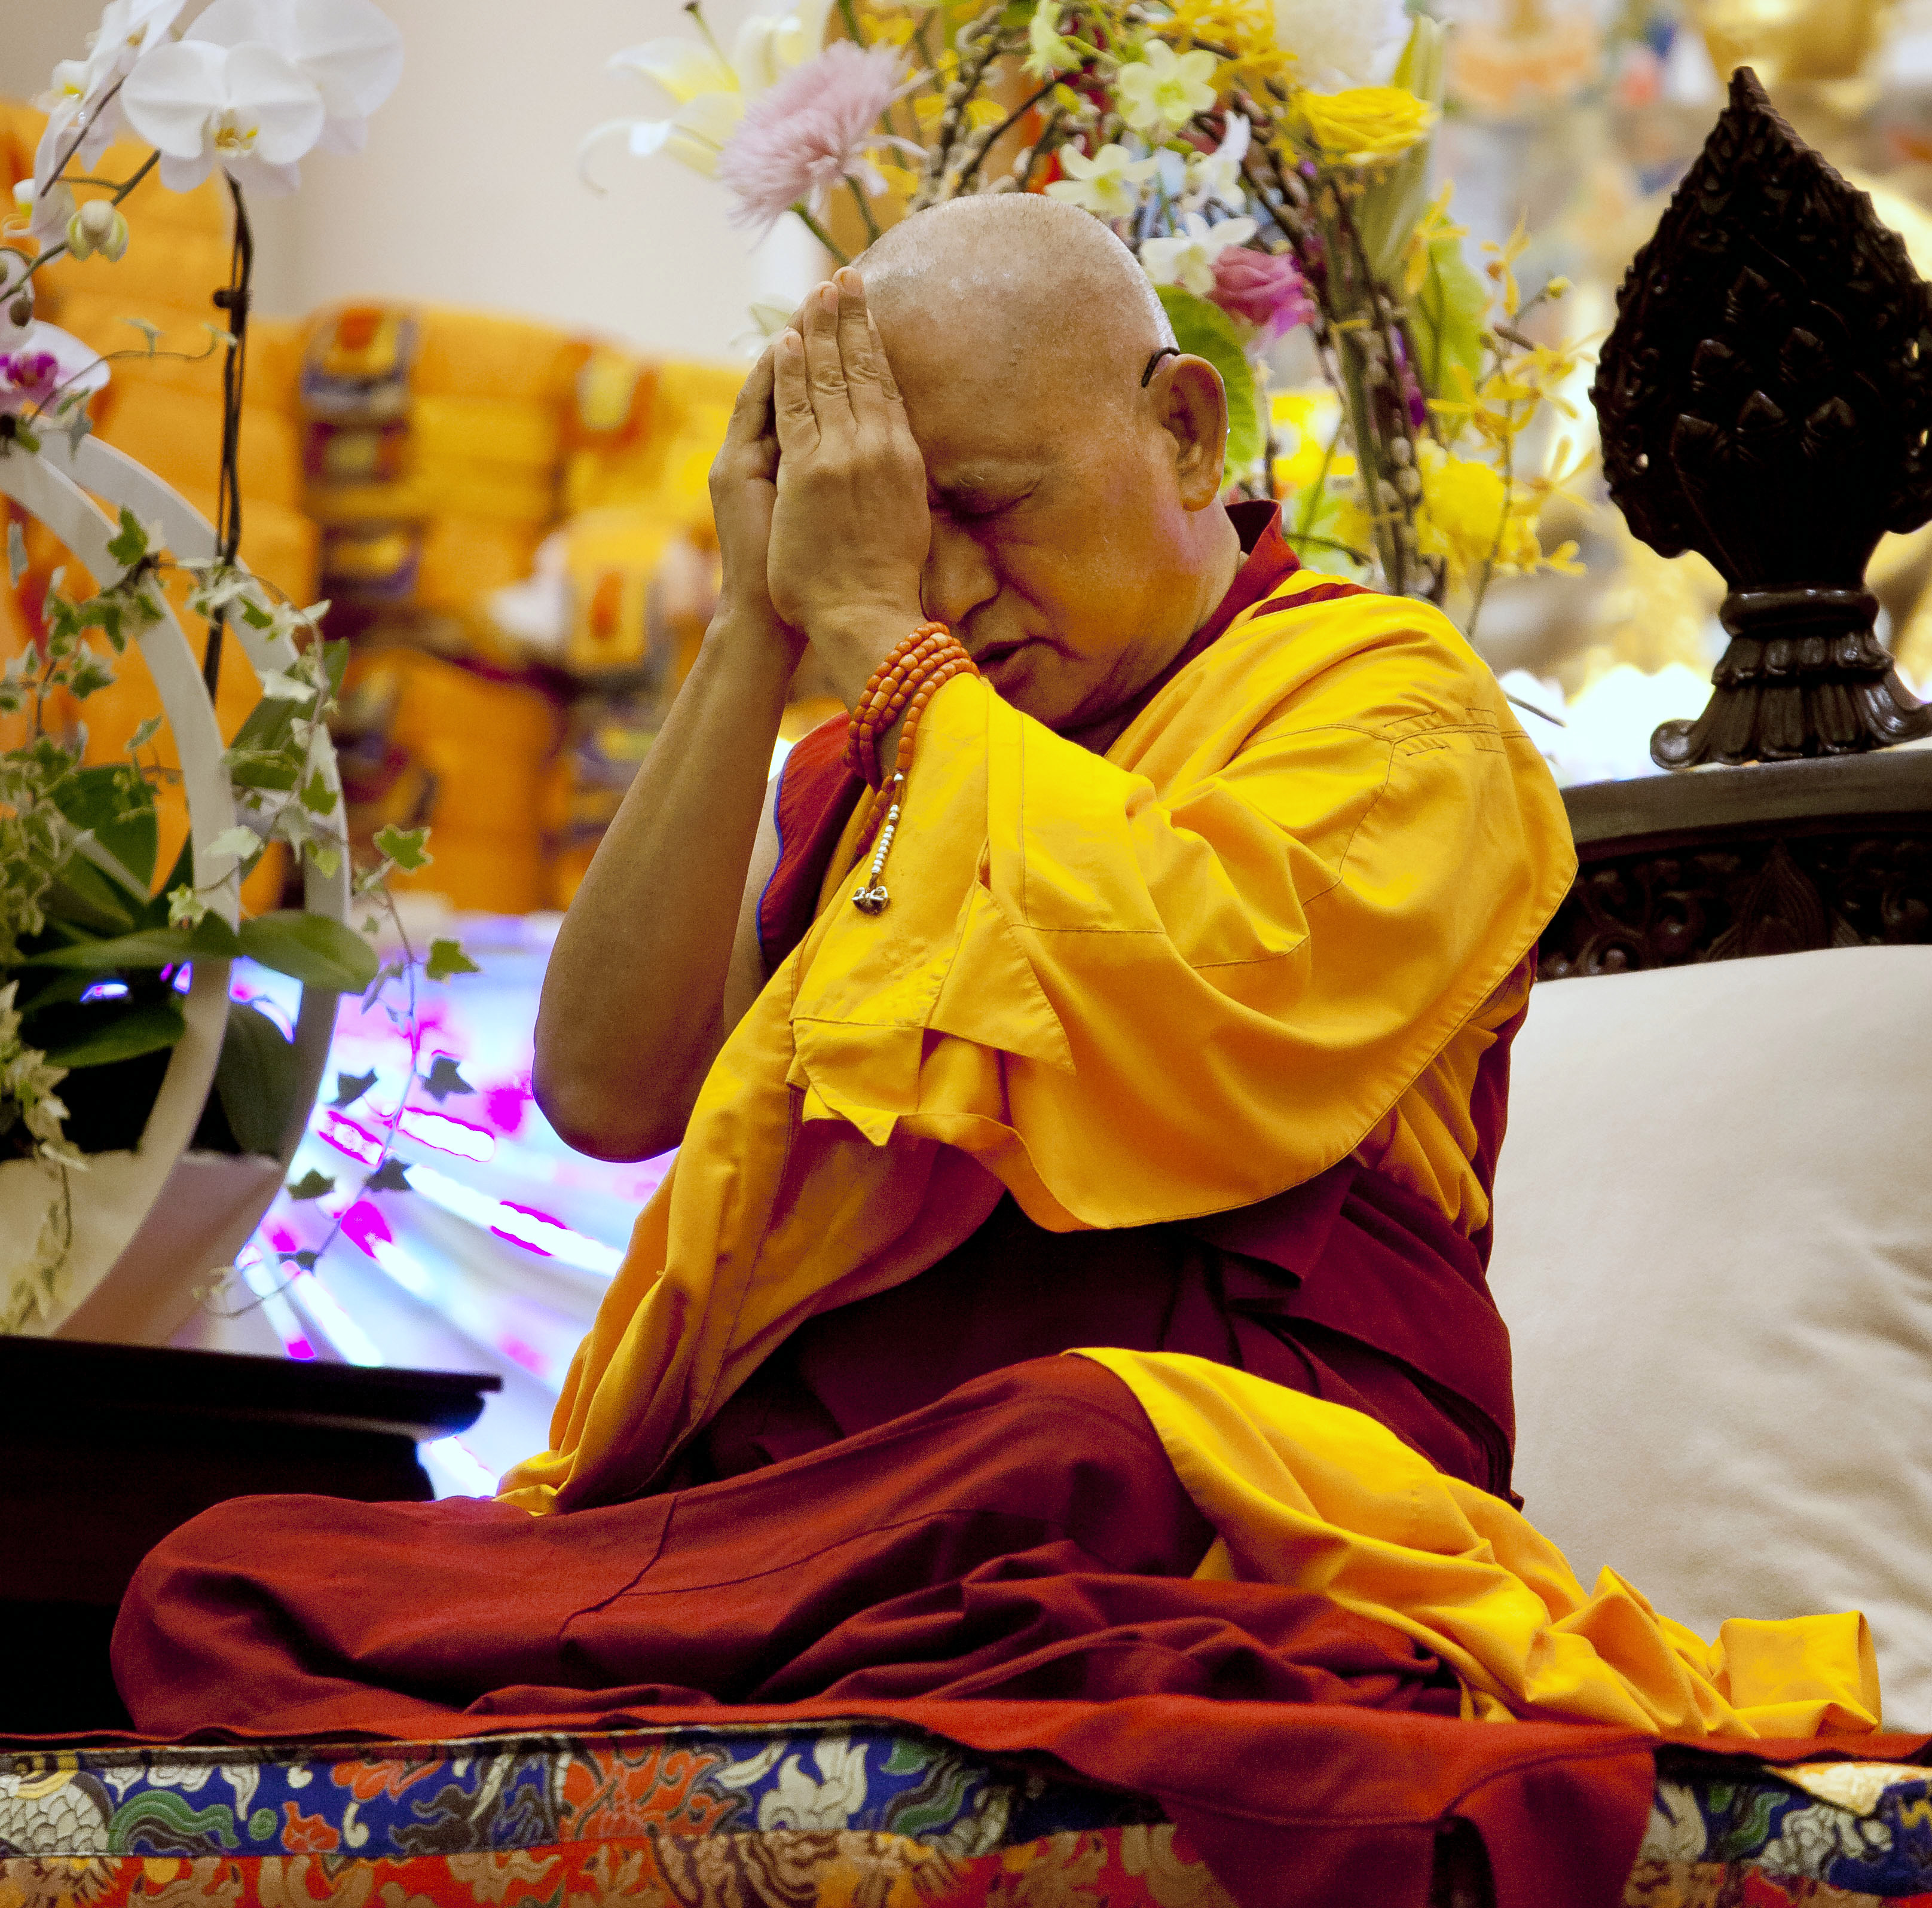 ABC offered a long life puja to Rinpoche during his visit, Singapore, March 8, 2013. Photo by Stephen Ching.